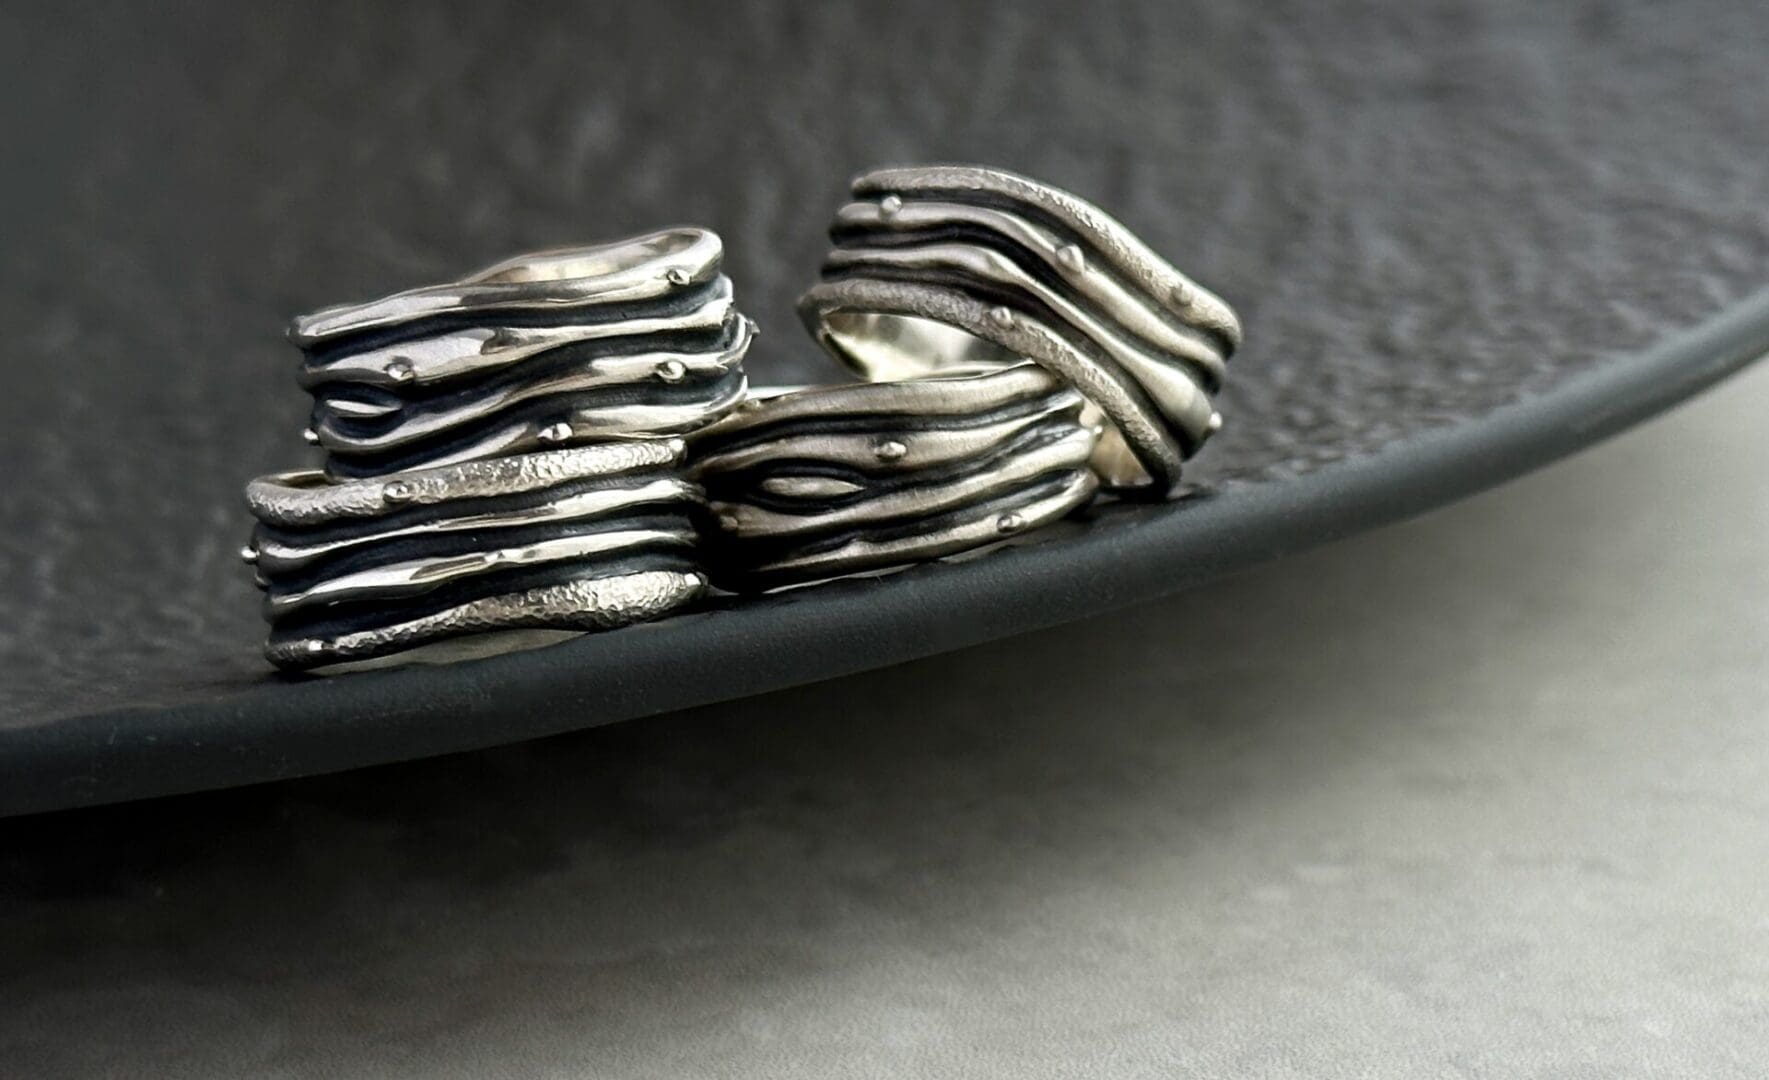 My Jewellery Garden Seaweed Wave Sterling Silver Ring Bands